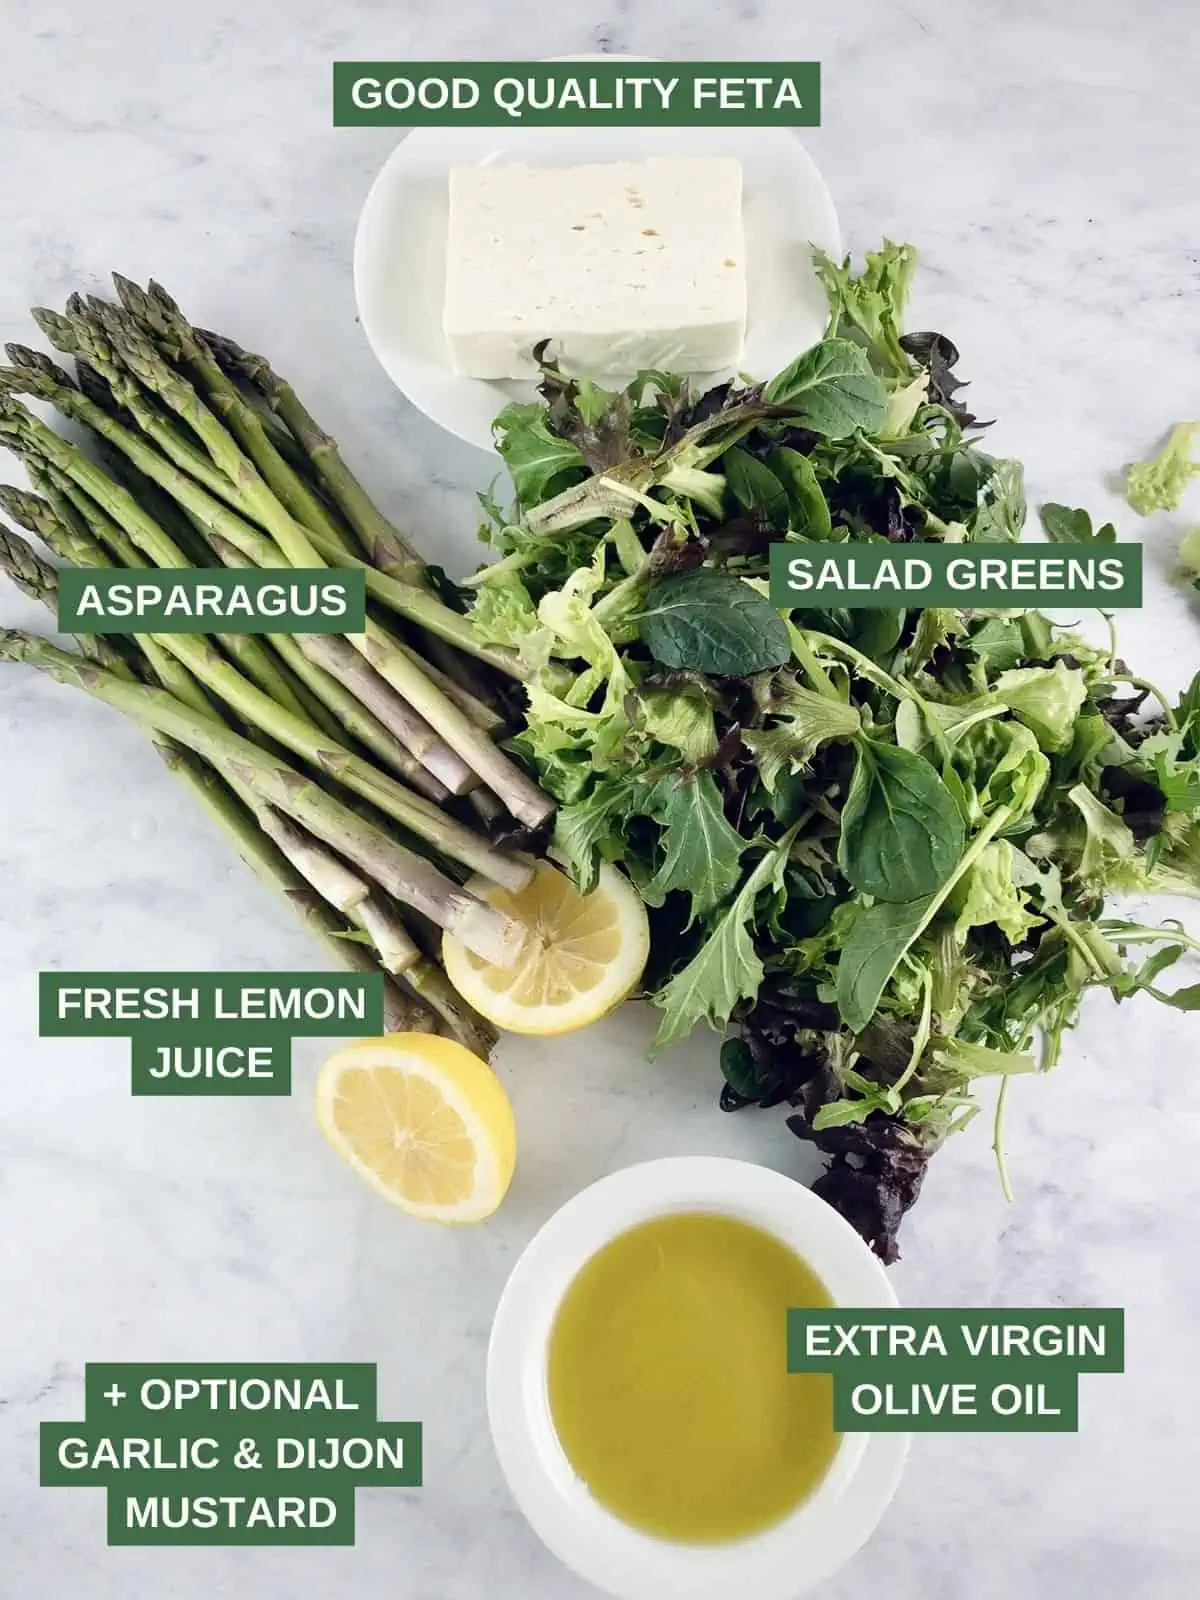 Labelled ingredients needed to make blanched asparagus salad with feta.